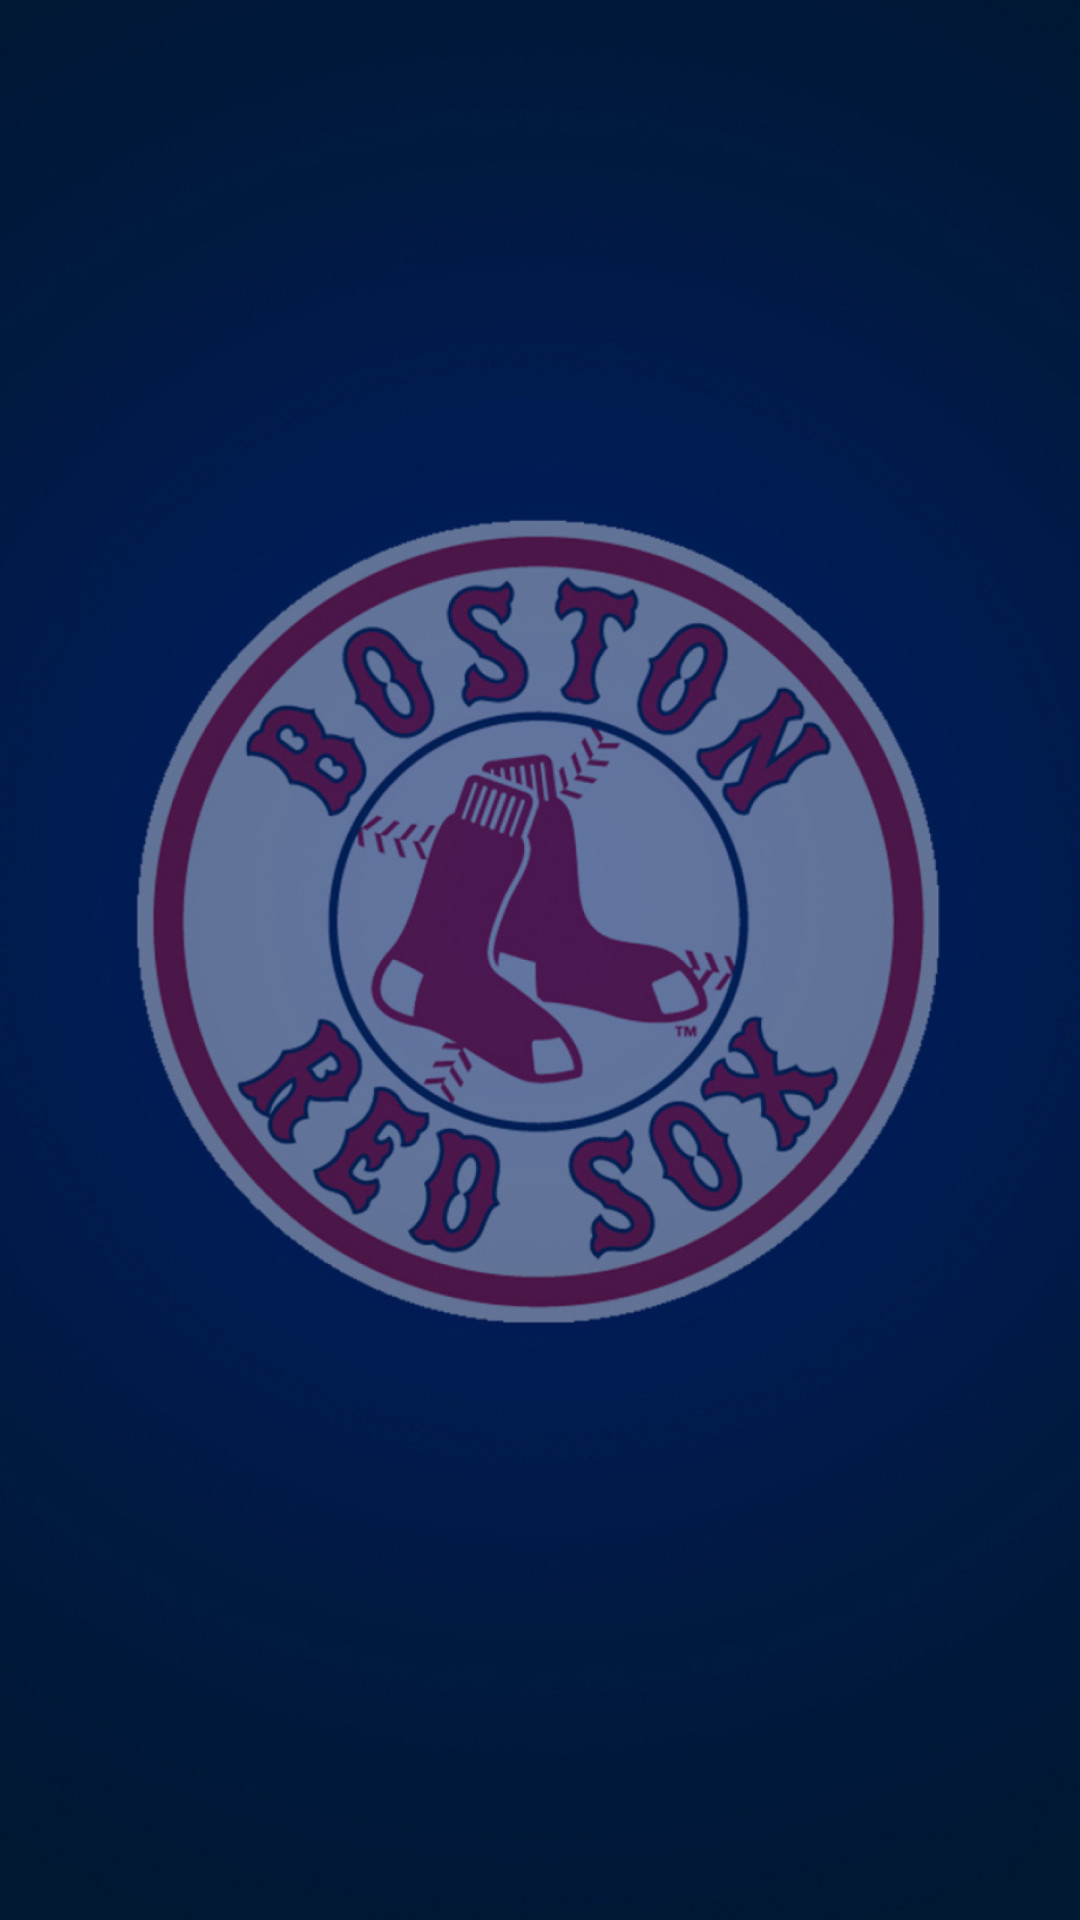 Red Sox Wallpapers and Backgrounds image Free Download